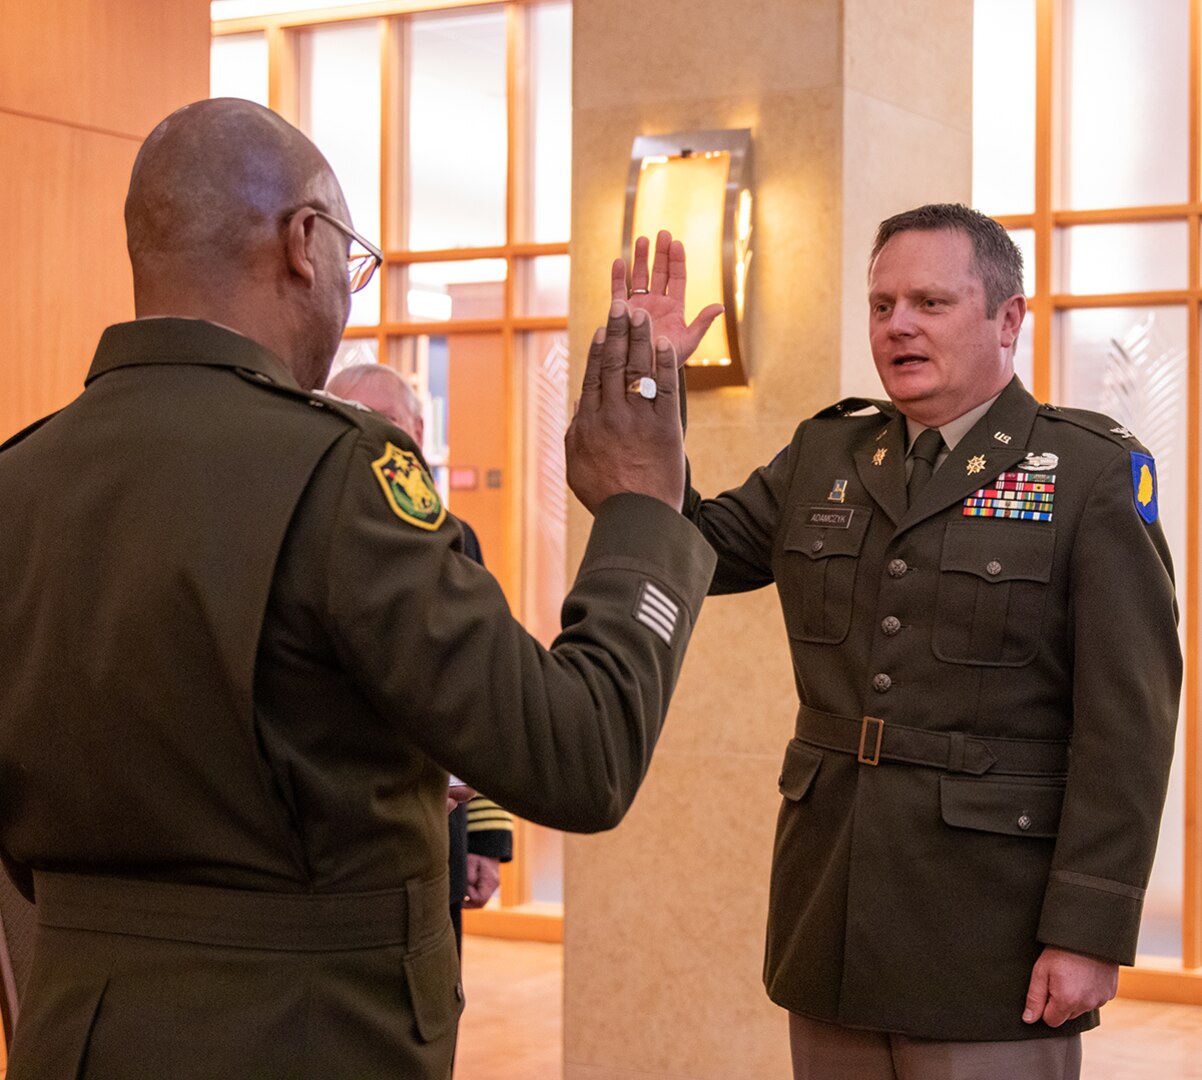 Maj. Gen. Rodney Boyd, Assistant Adjutant General – Army and Commander of the Illinois Army National Guard, administers the oath of commissioned officers to newly promoted Illinois Army National Guard Col. Andrew Adamczyk, of Springfield, during a promotion ceremony April 28 at the Abraham Lincoln Presidential Library and Museum in Springfield.